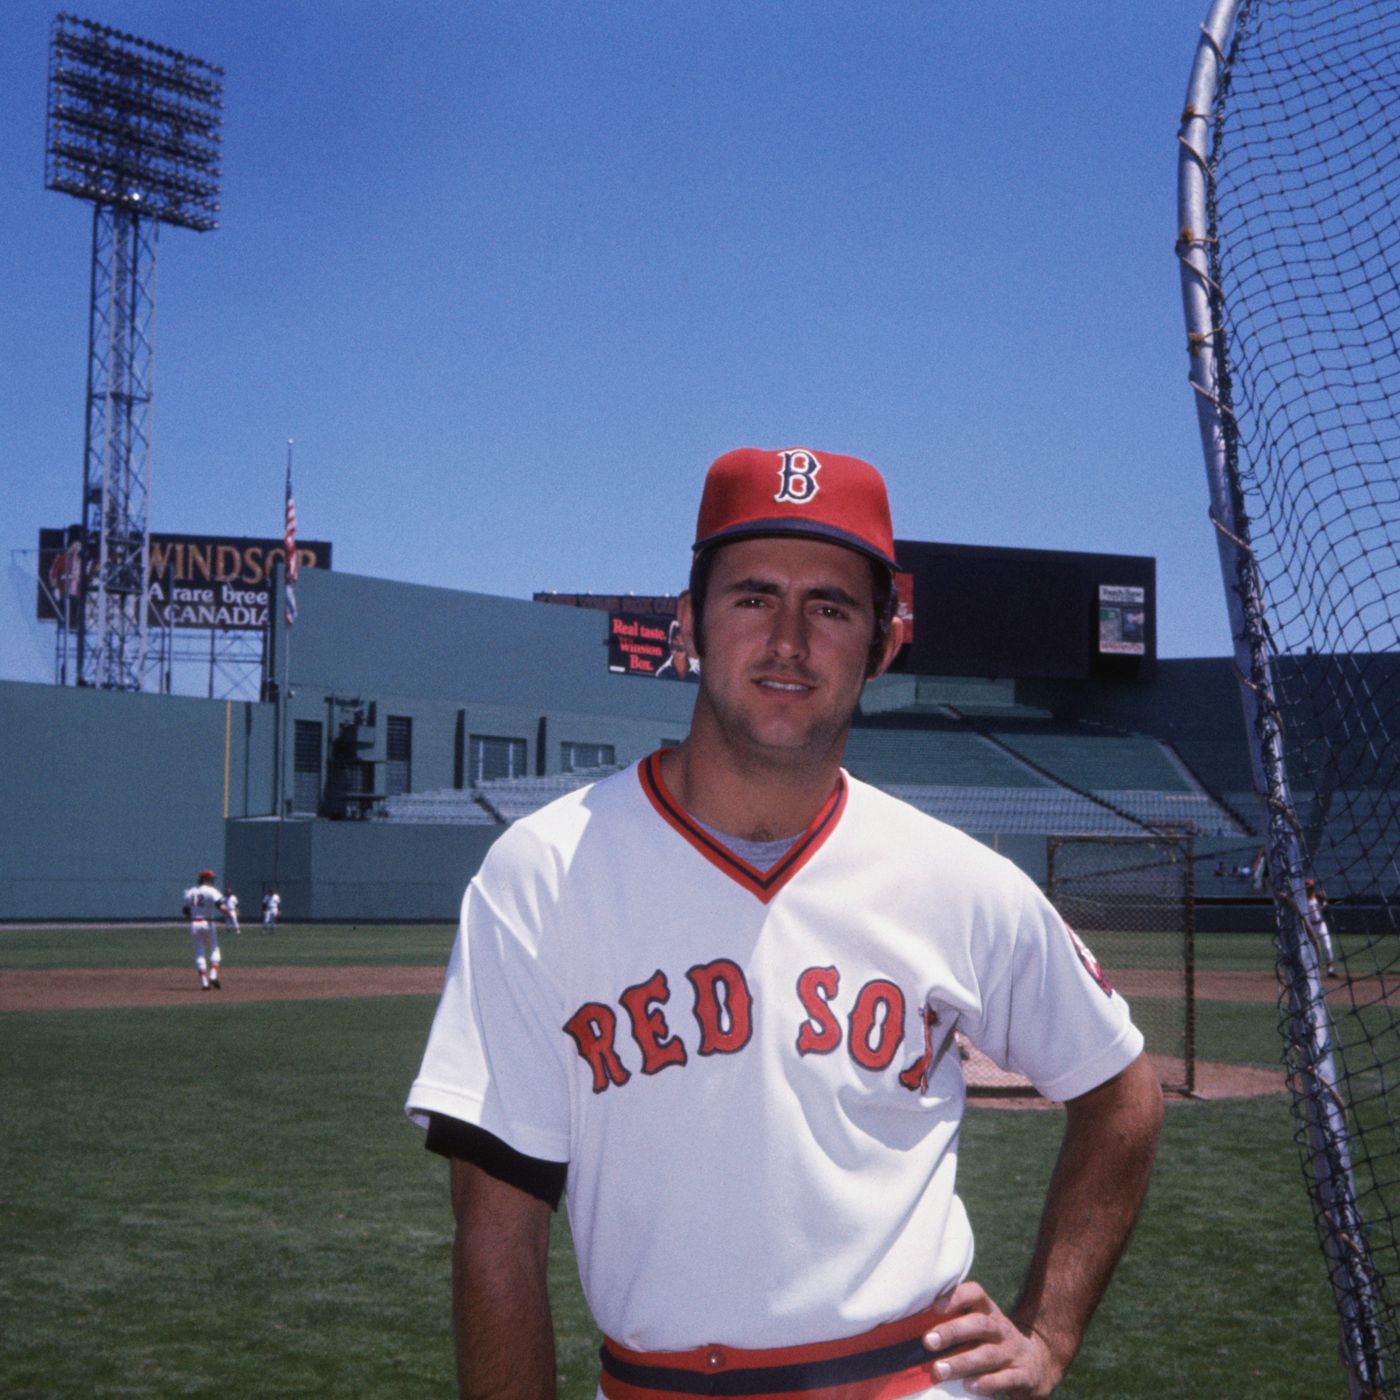 1970 red sox uniforms